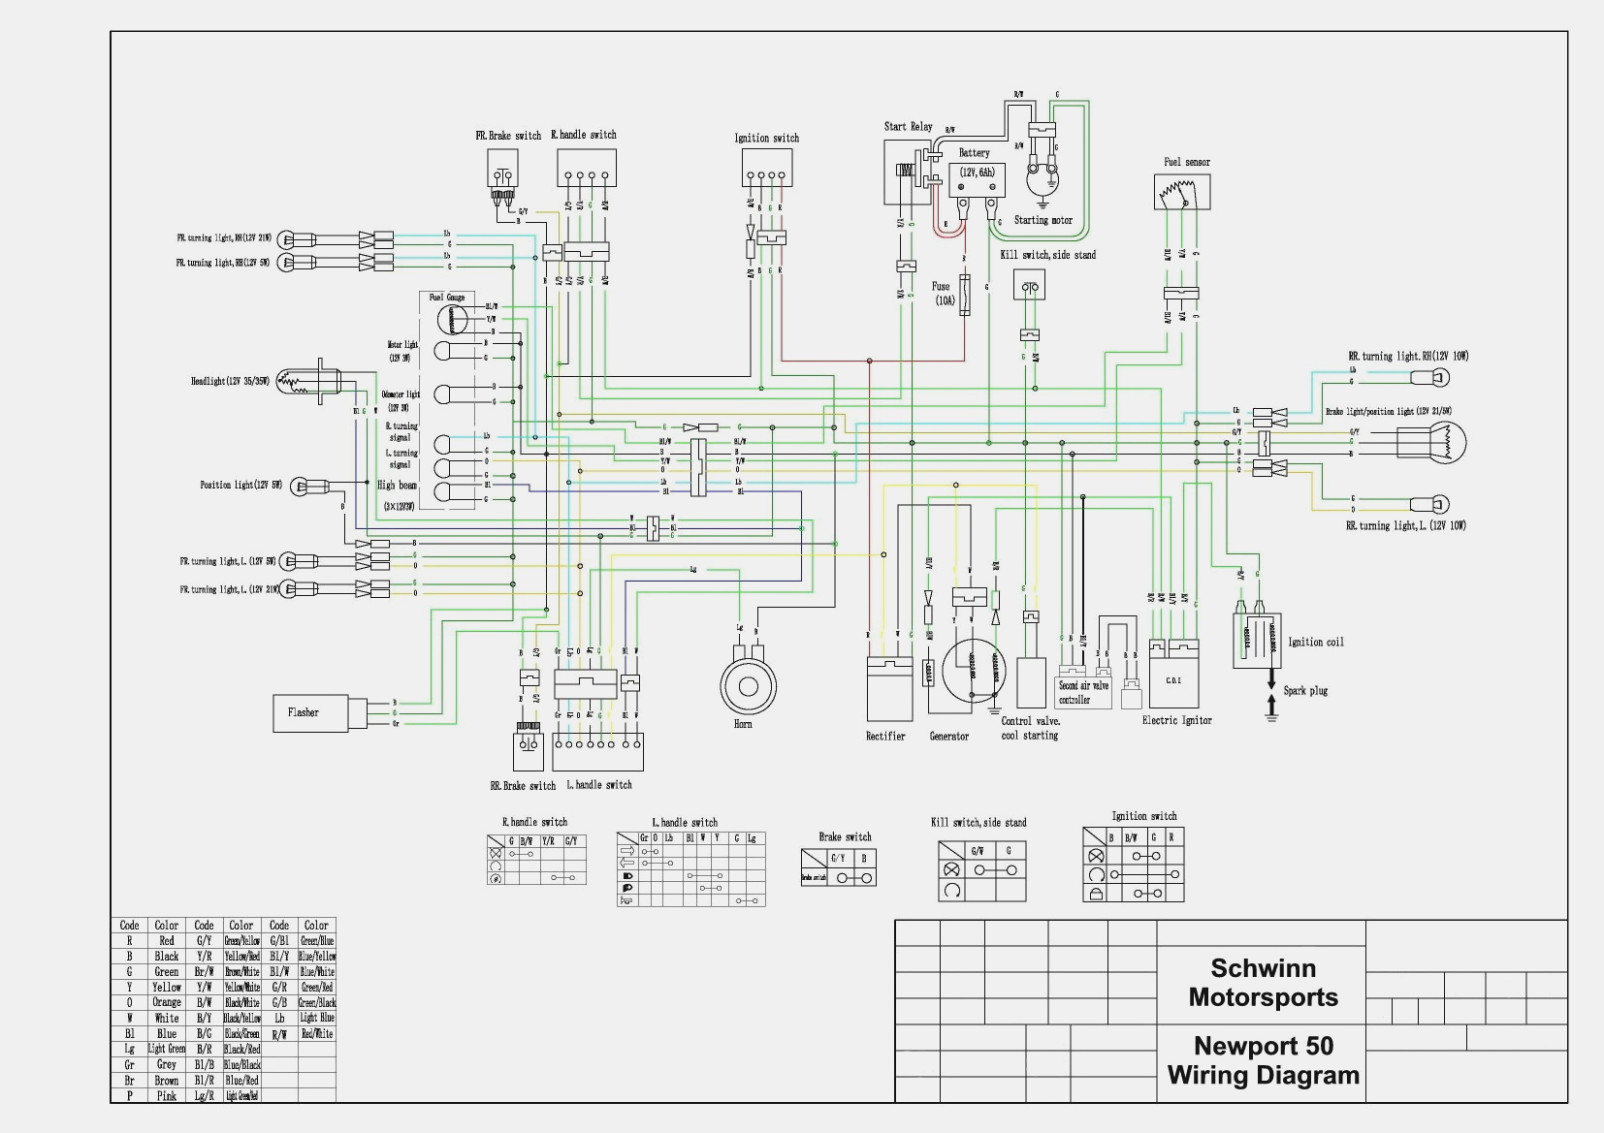 Chinese Scooter Wiring Diagram | Wiring Diagram - 50Cc Chinese Scooter Wiring Diagram